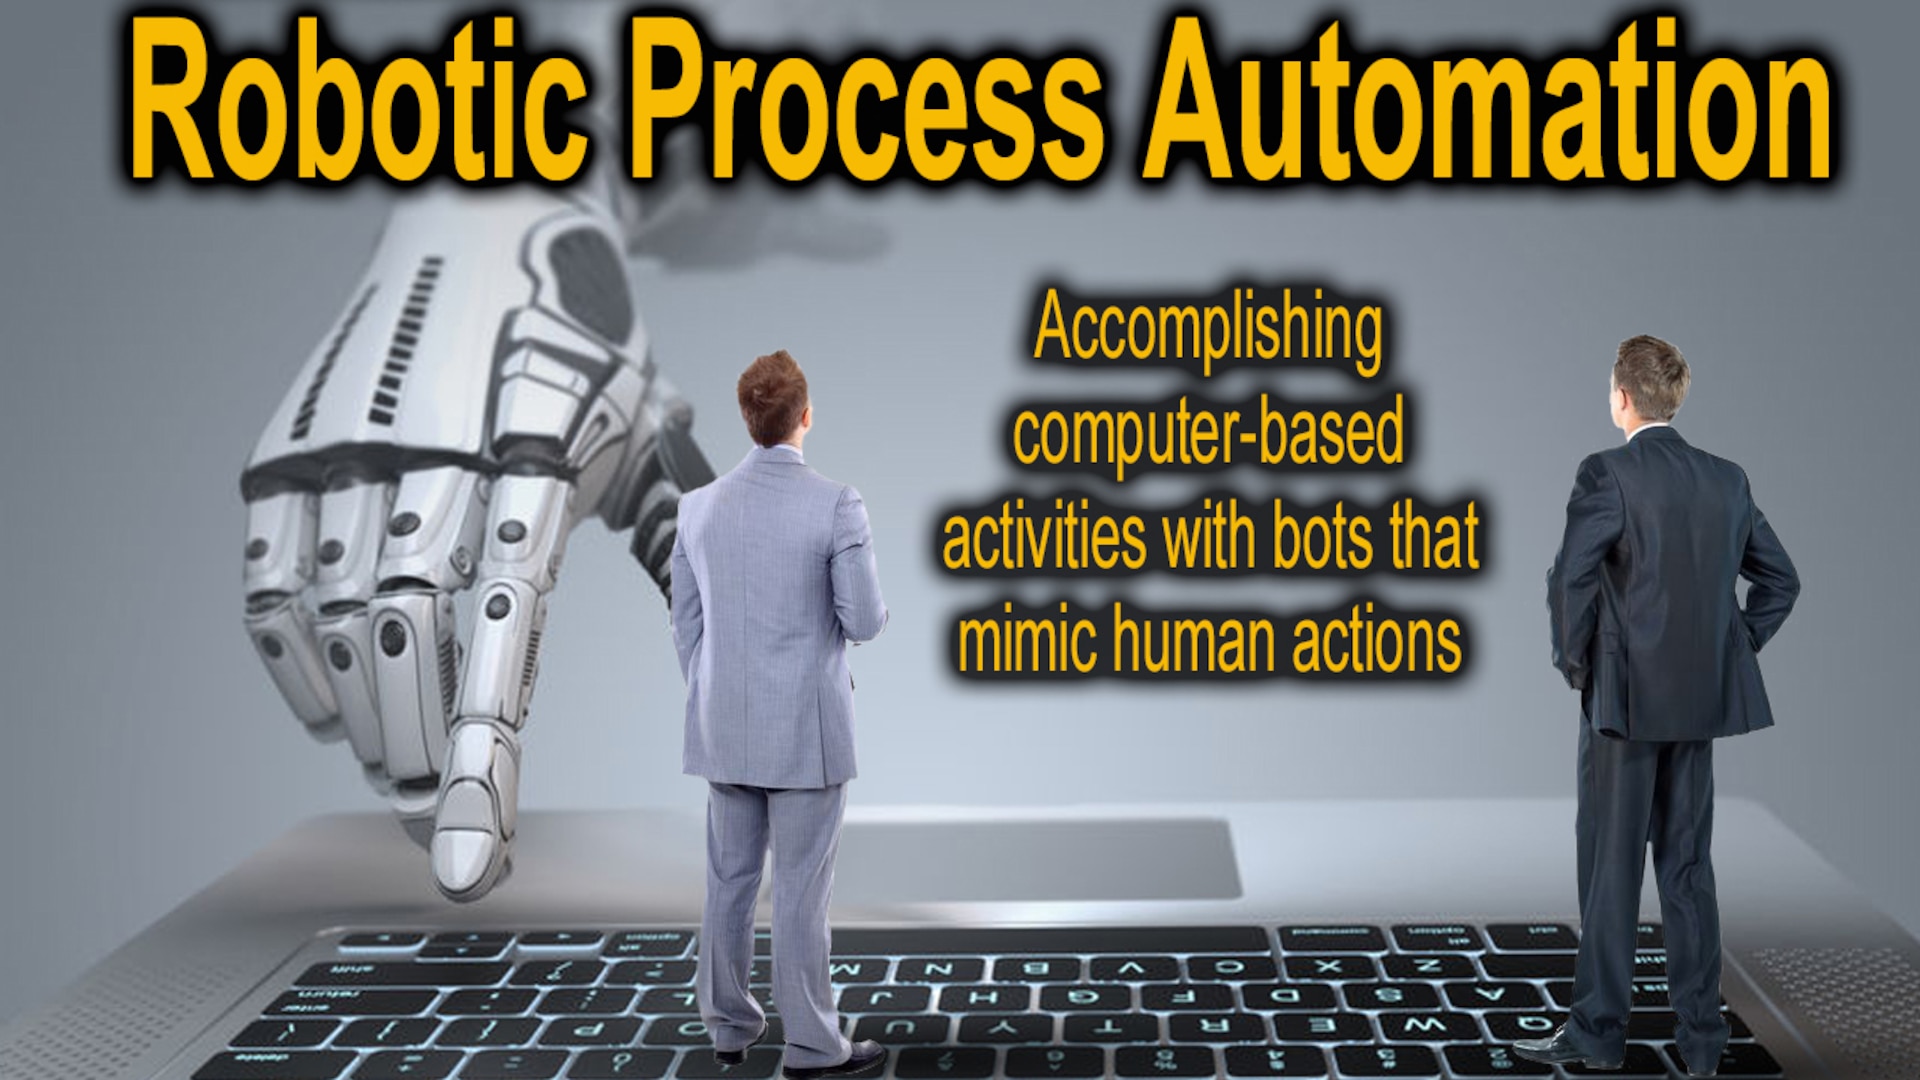 A graphic of two men in suits standing on an oversize keyboard with a robot hand approaching, accompanied by the text Robotic Process Automation: Accomplishing computer-based activities with bots that mimic human action